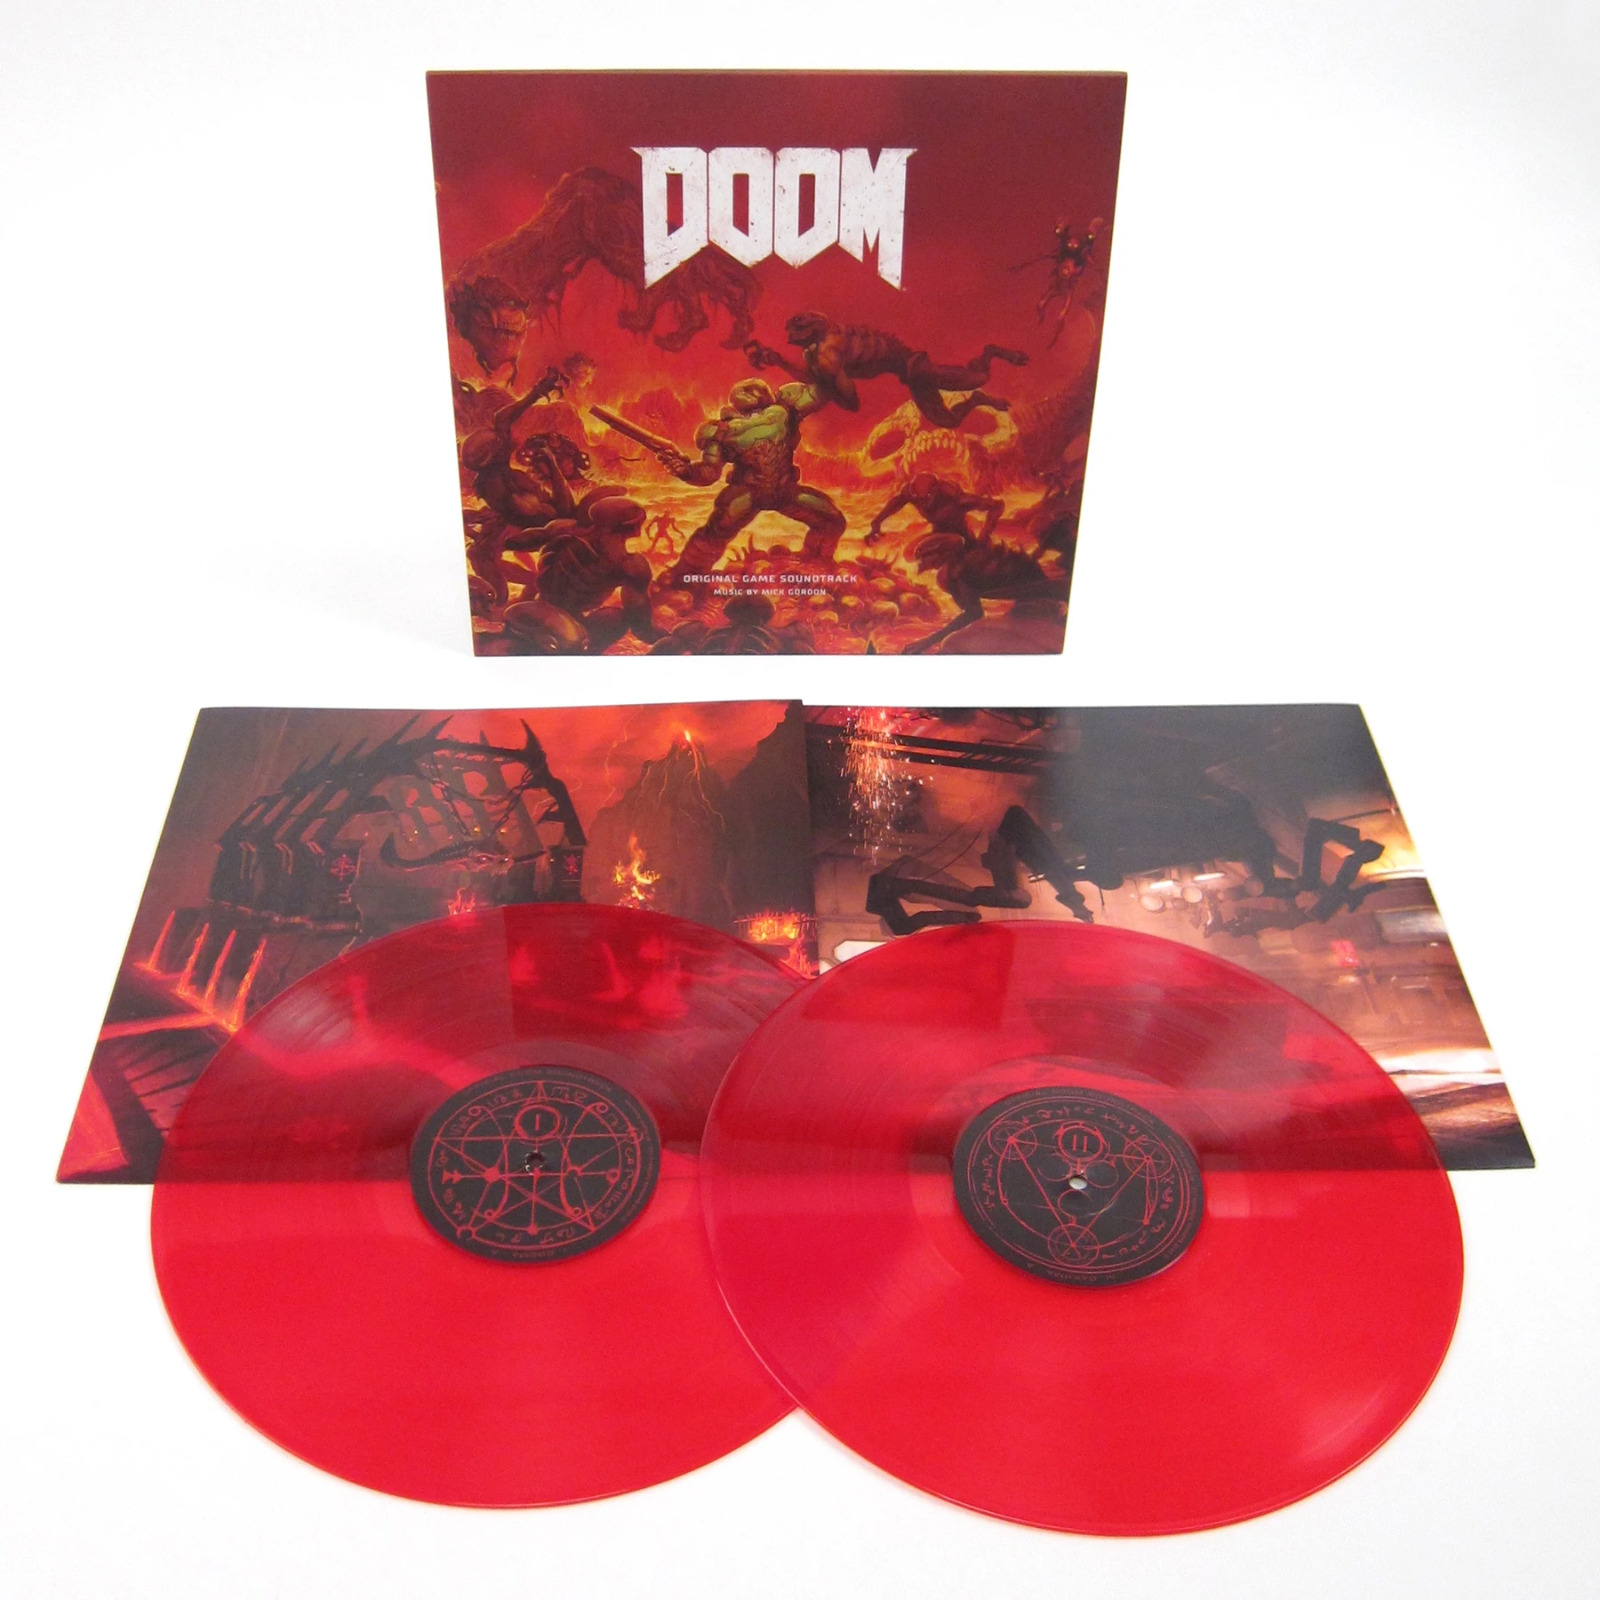 Doom Deluxe Double Vinyl Record Soundtrack 2 LP RED Variant Bethesda (VGNM)